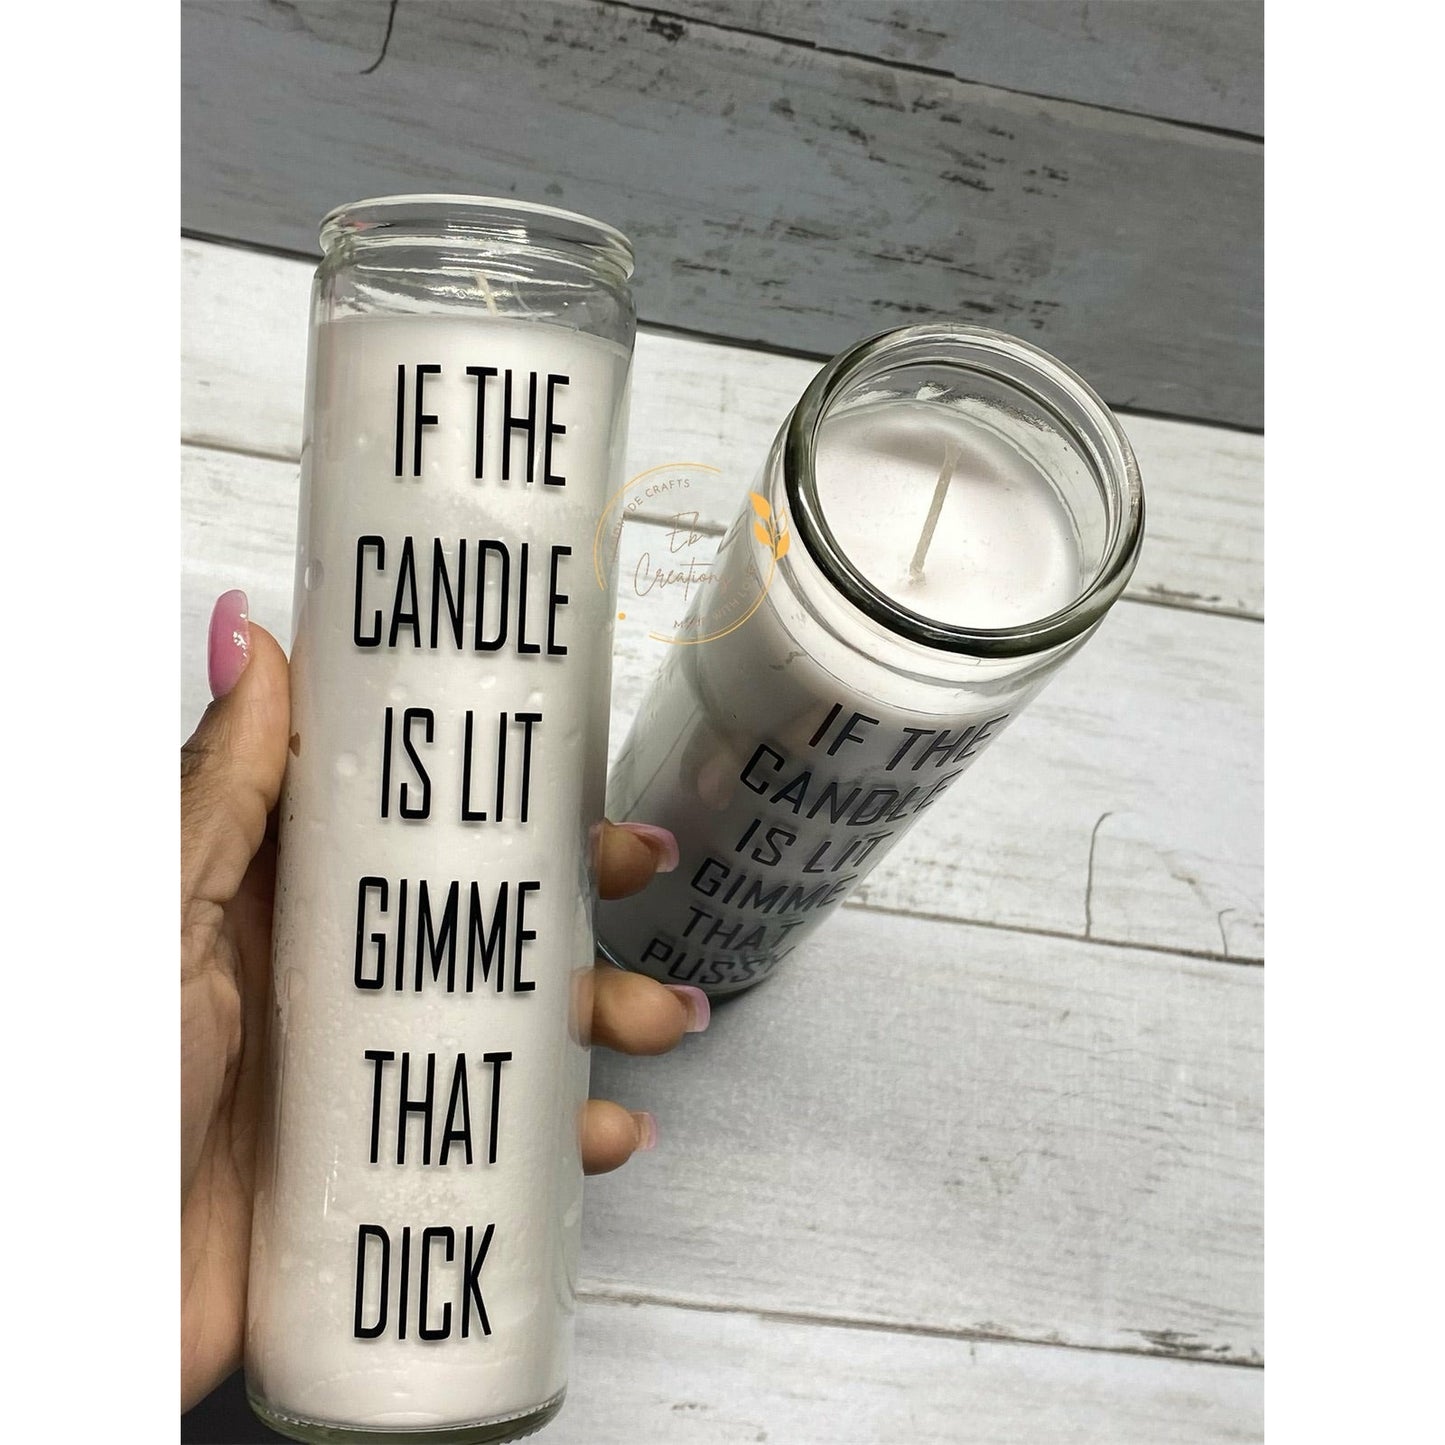 Naughty Candle | Couples | Dirty | Adult - Eb Creations Candles Naughty Candle | Couples | Dirty | Adult